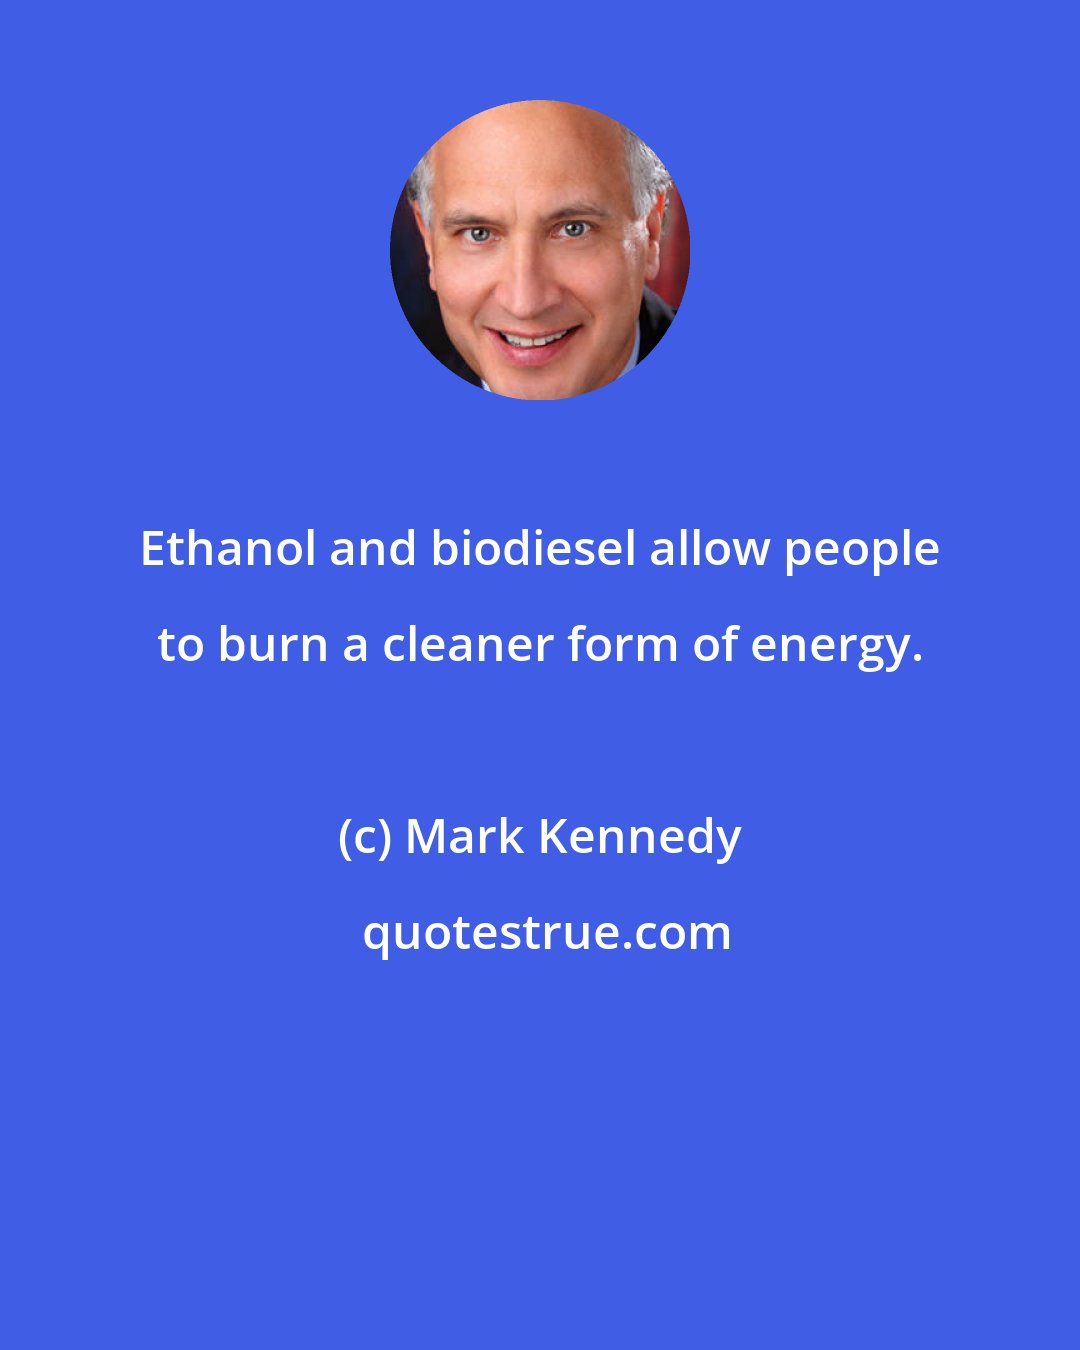 Mark Kennedy: Ethanol and biodiesel allow people to burn a cleaner form of energy.